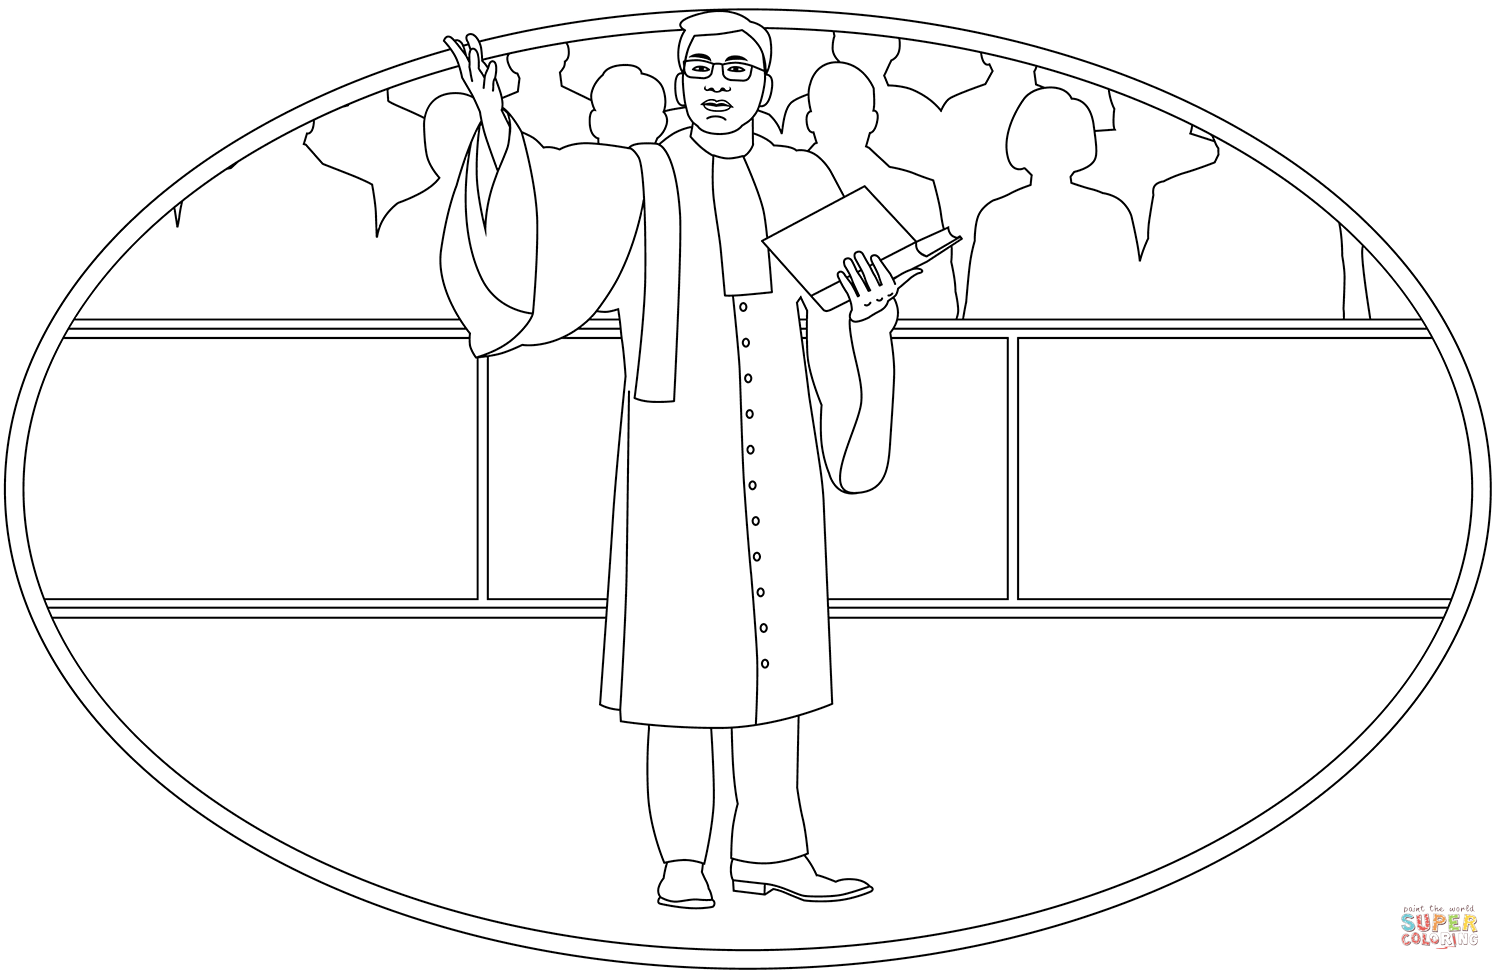 Lawyer coloring page free printable coloring pages